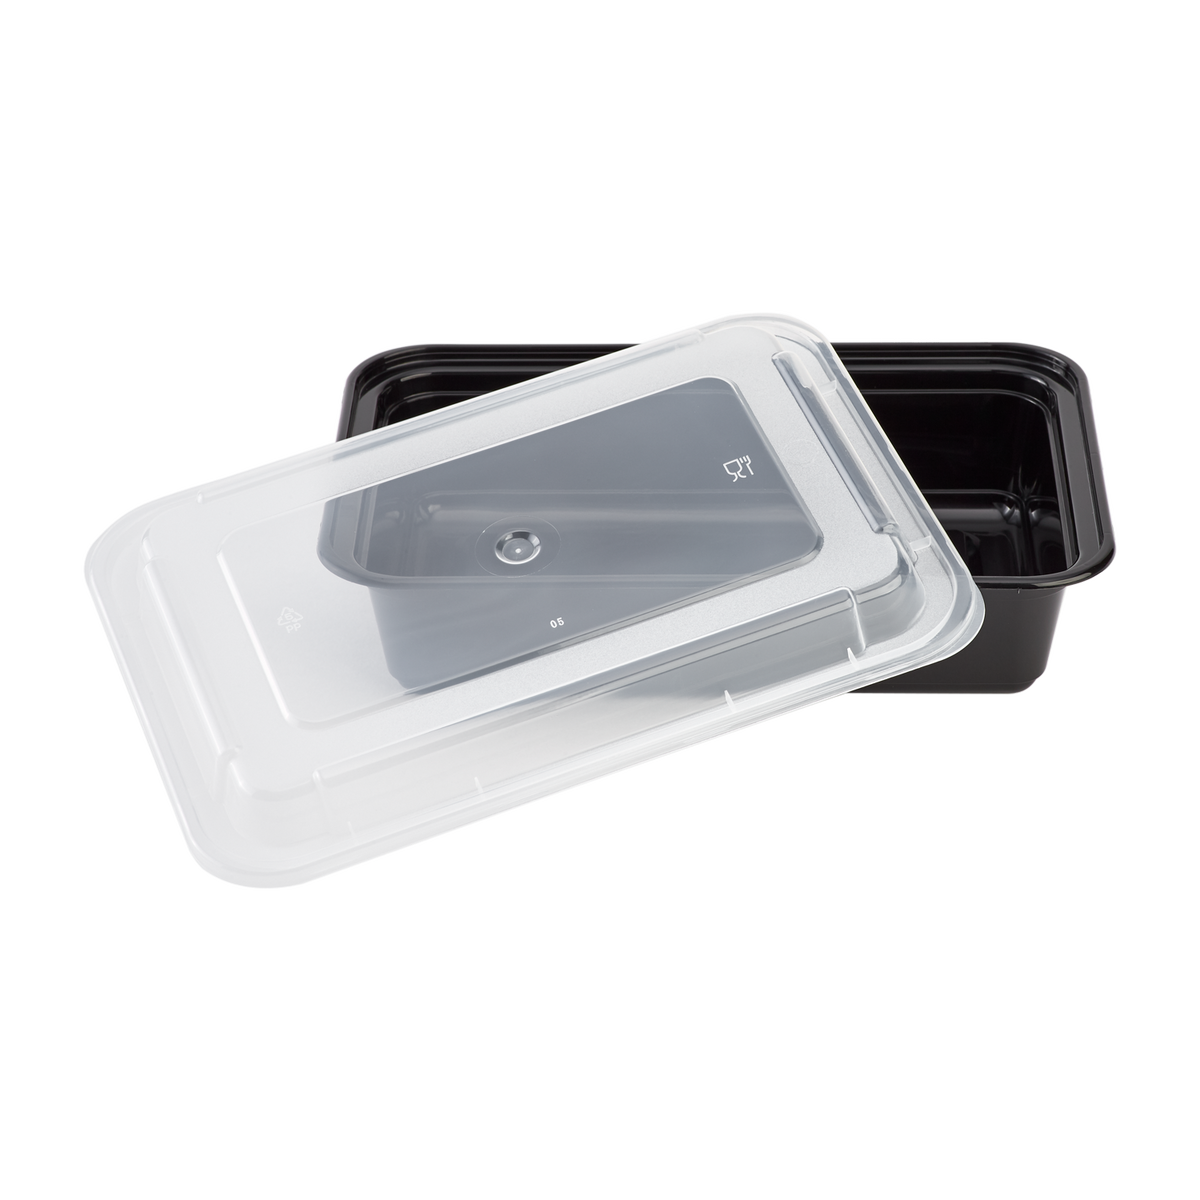 Meal Preparation Containers [38OZ] Plastic Food Storage Containers